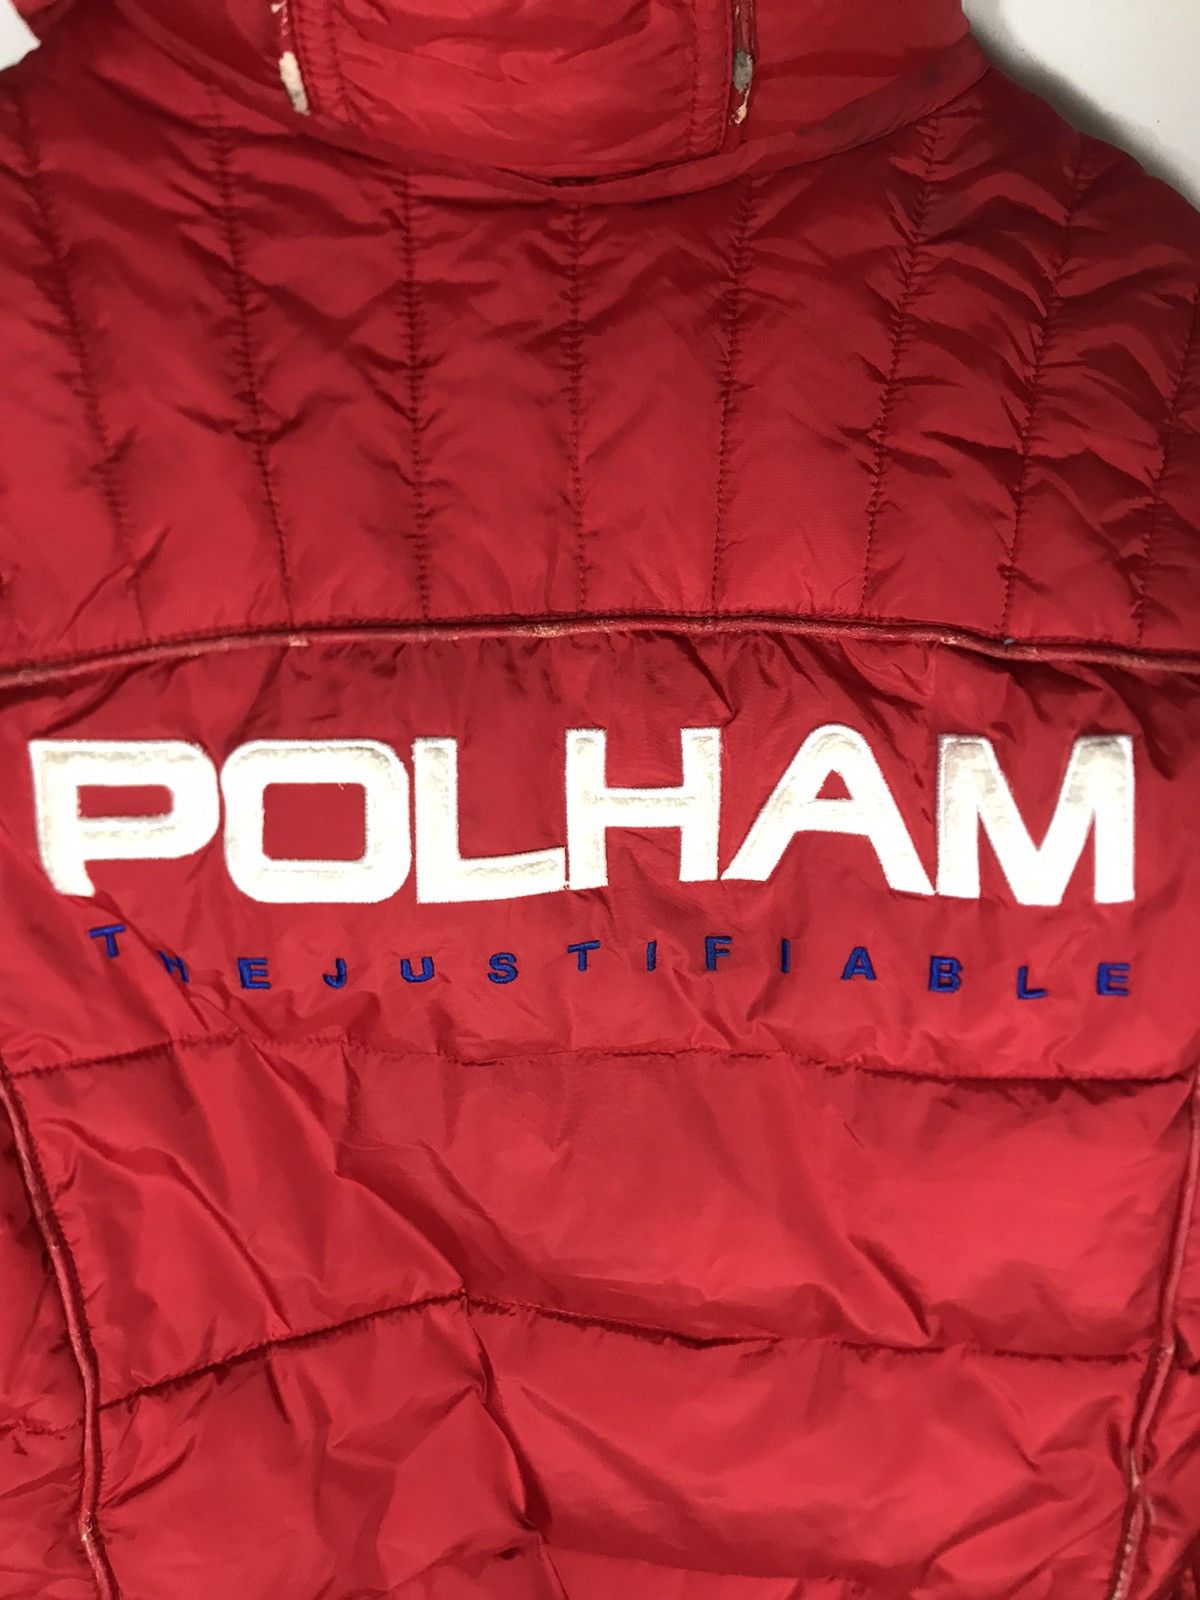 Red Jacket Polham detachable hoodie puffer jacket spell out embroidered Size US M / EU 48-50 / 2 - 5 Thumbnail